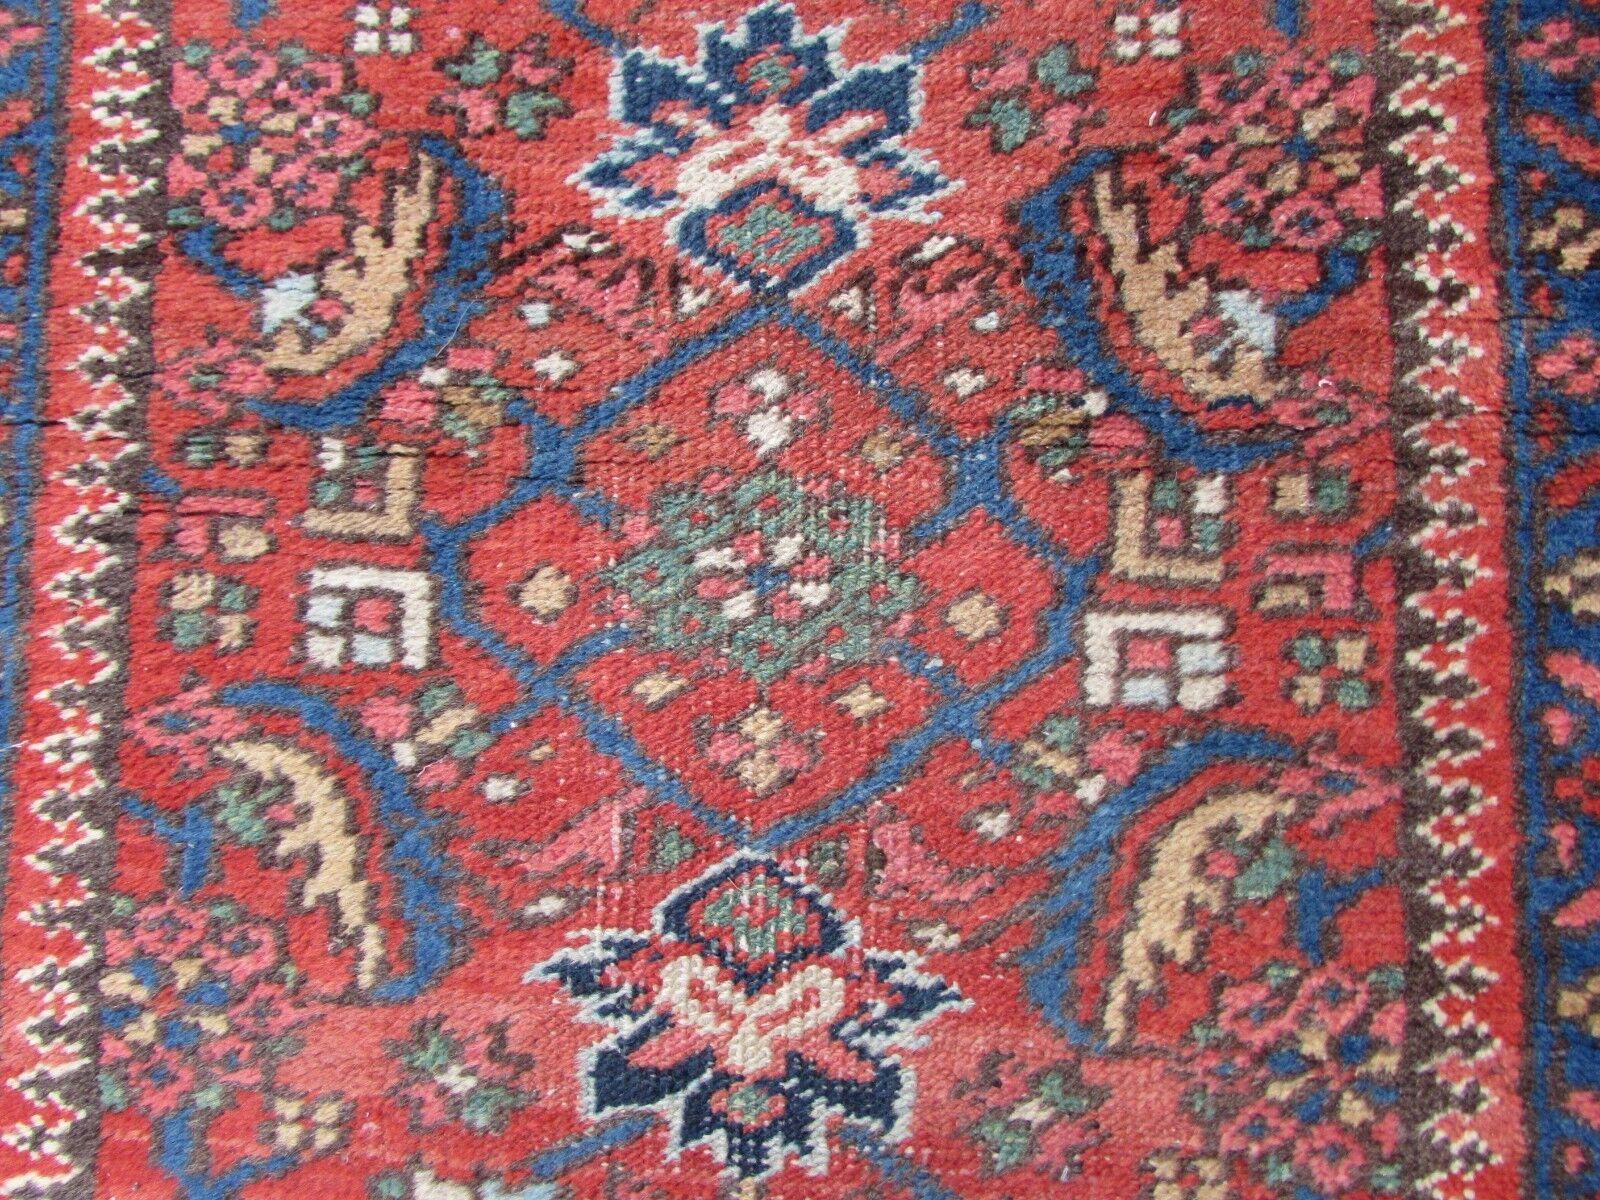 Handmade Antique Persian Style Mahal Runner Rug 2.5' x 12.1', 1920s, 1Q57 For Sale 2